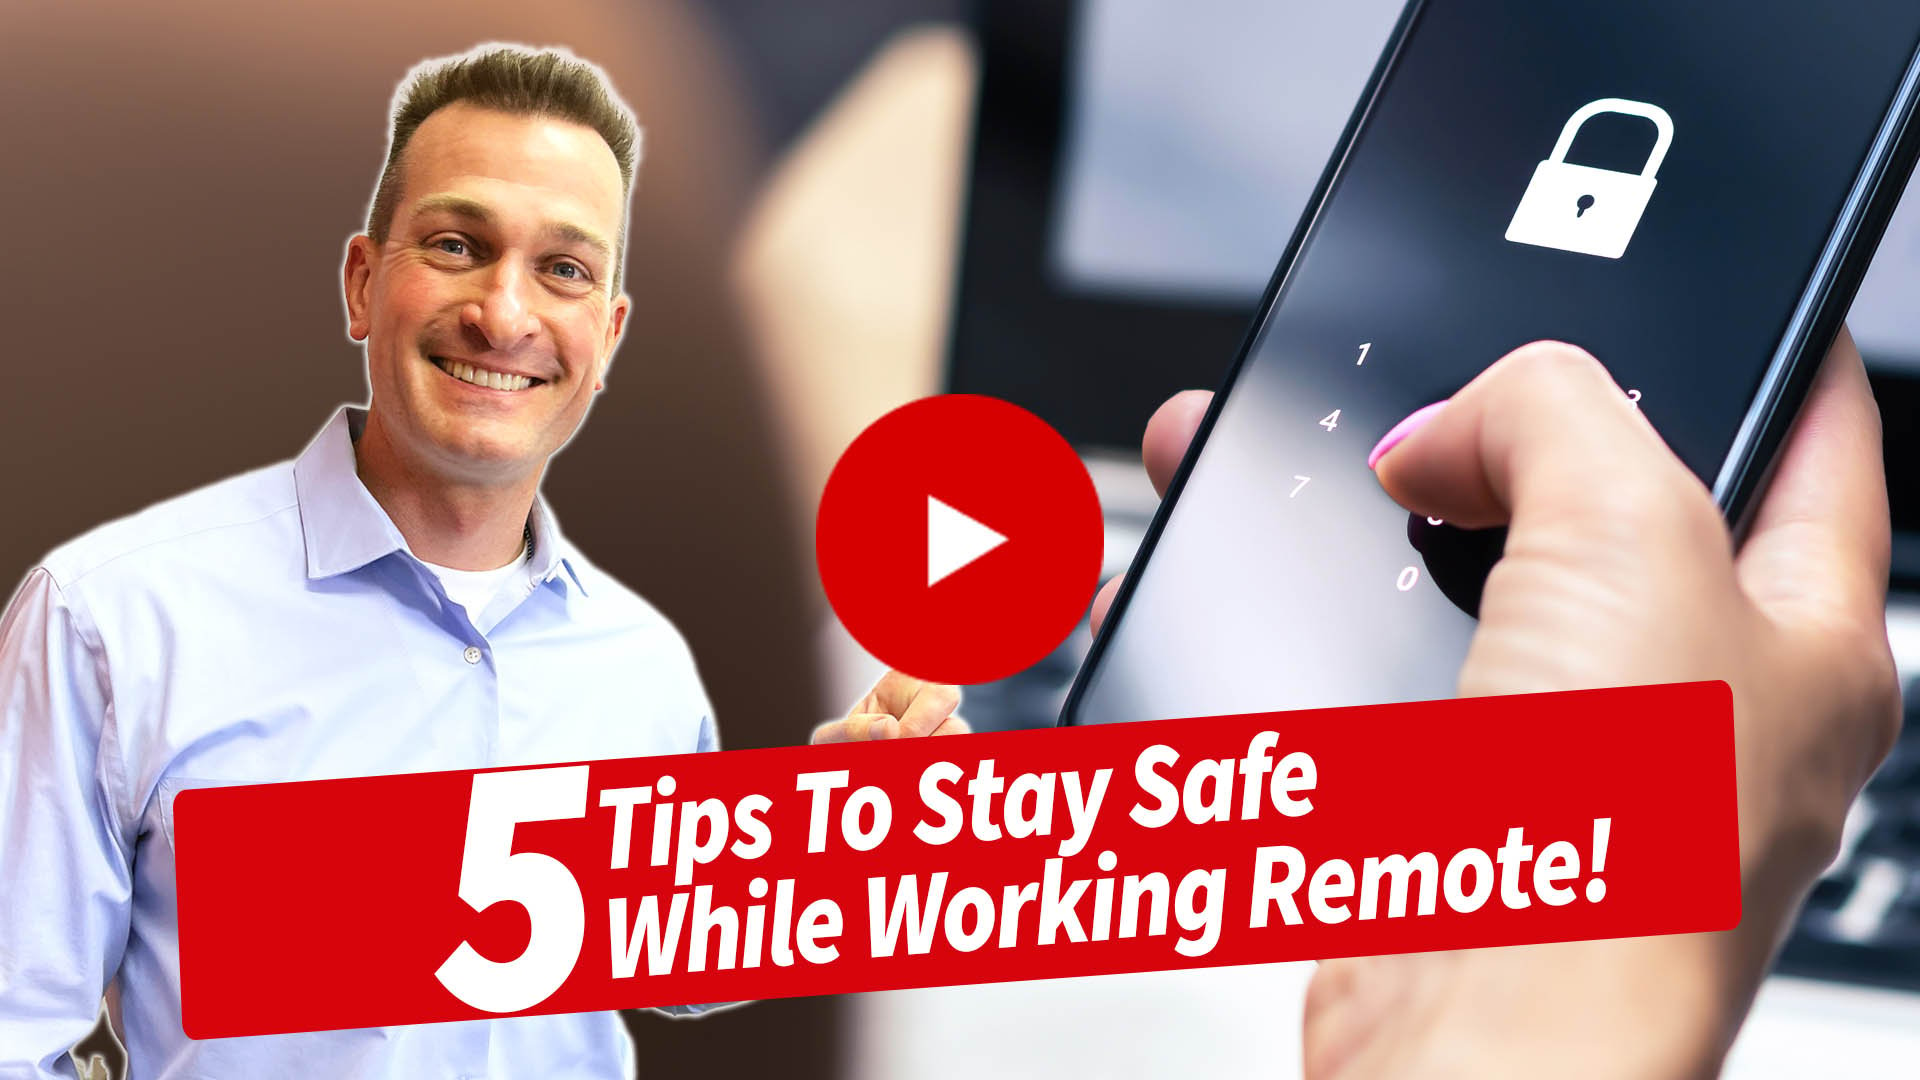 5 Tips To Stay Safe While Working Remote